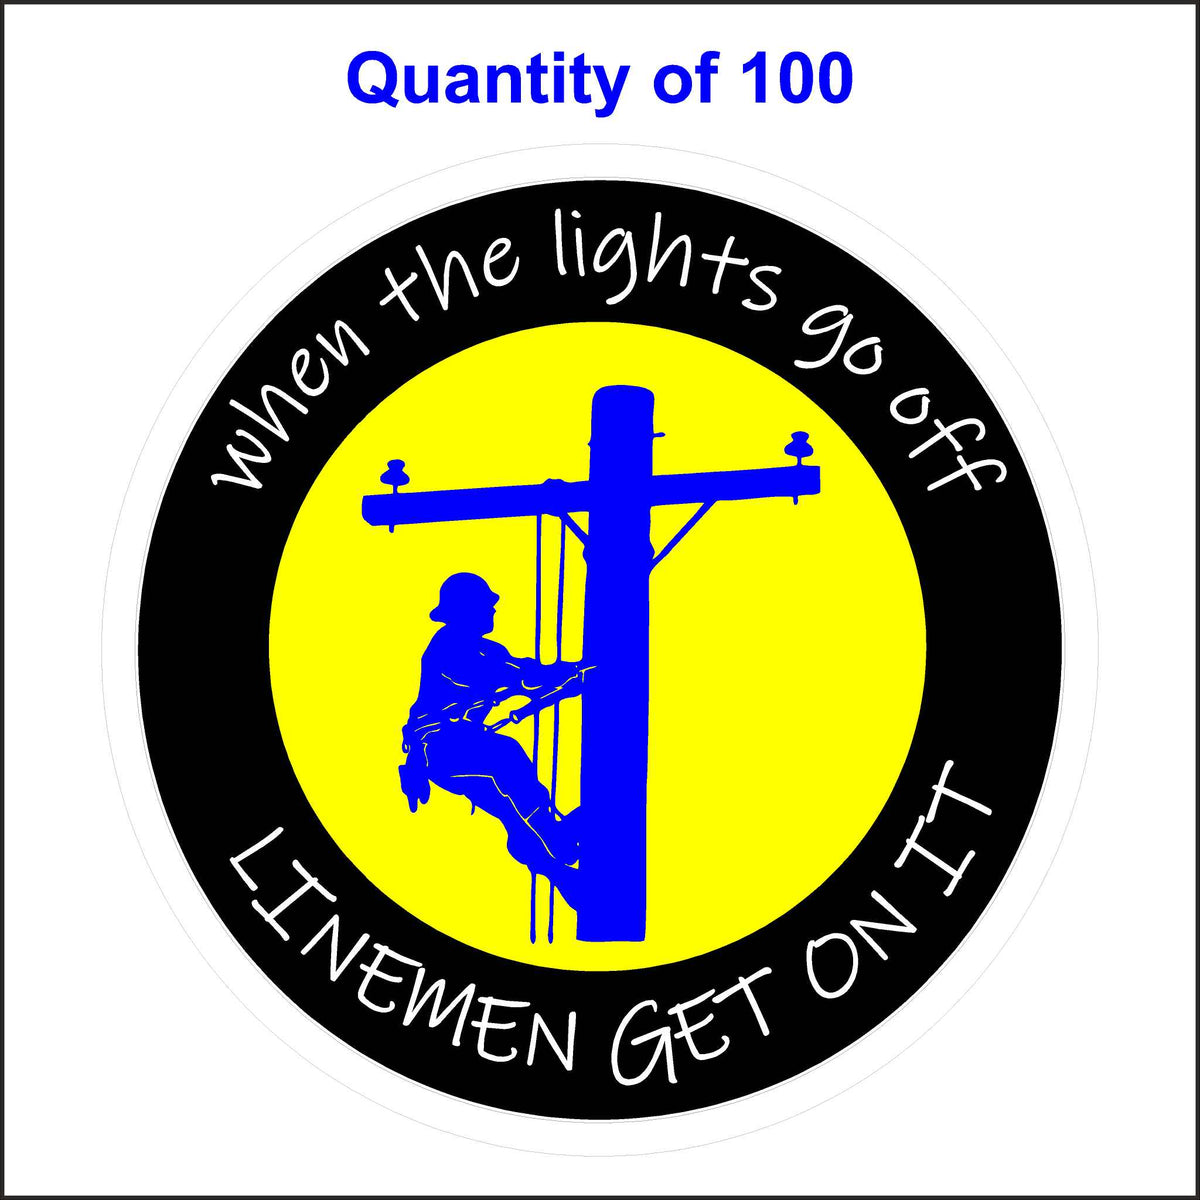 When the Lights Go Off Lineman Get it on Sticker. 100 Quantity.